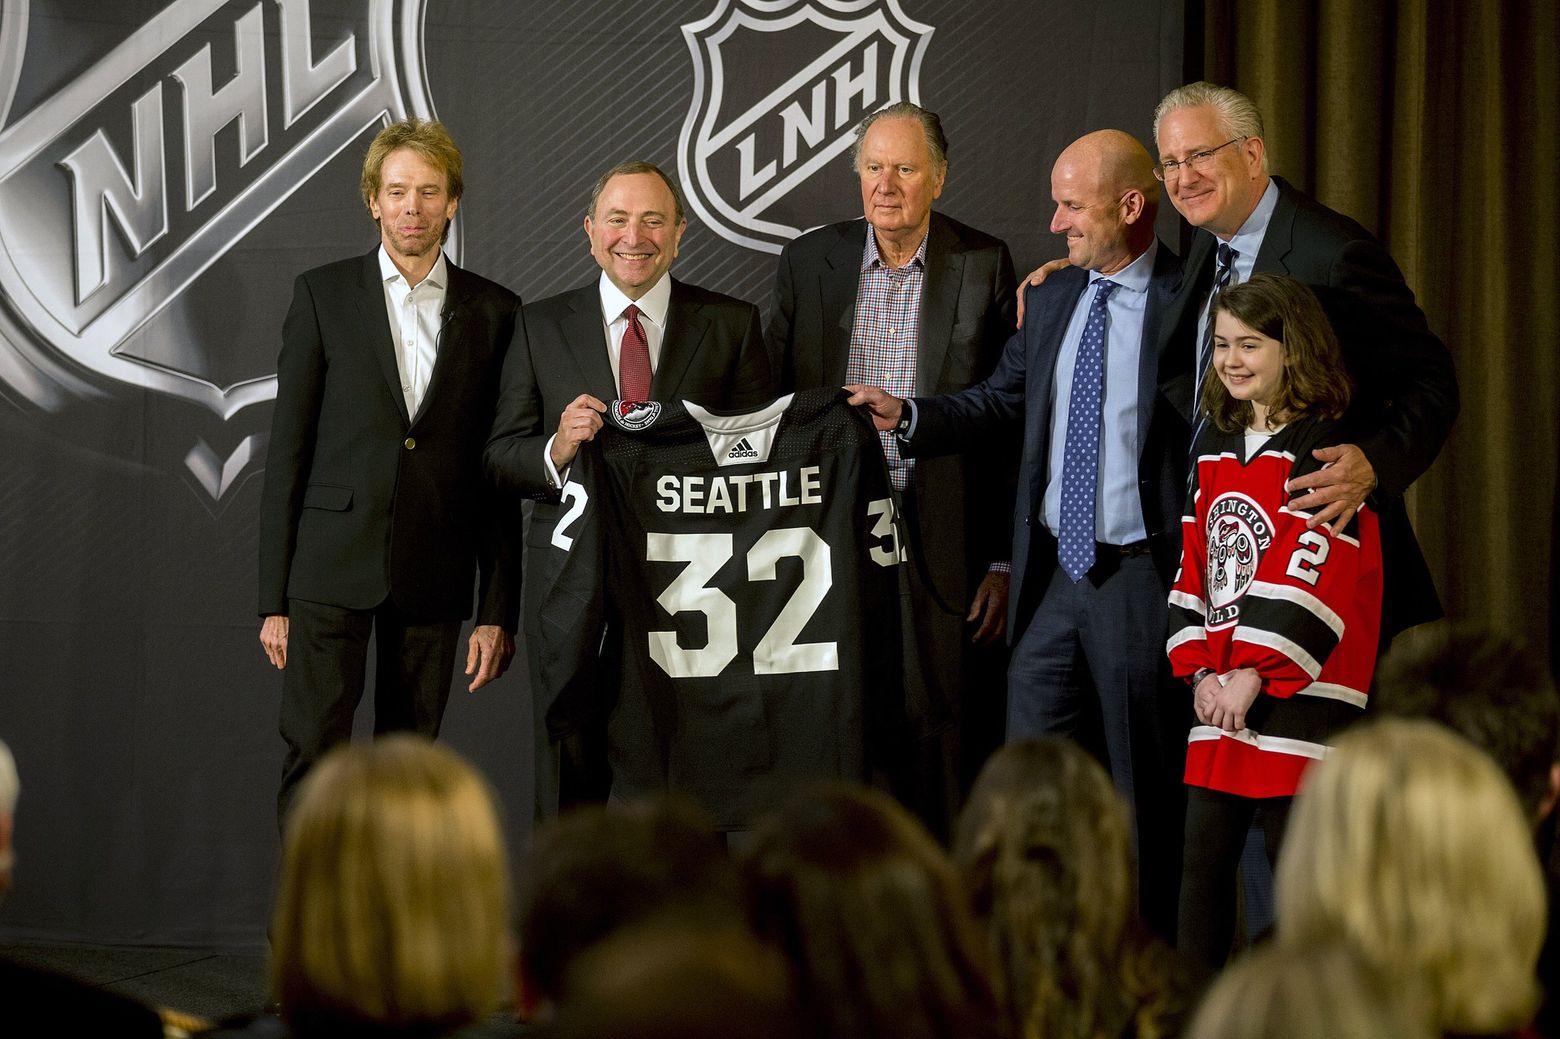 NHL team name expected by June - Puget Sound Business Journal